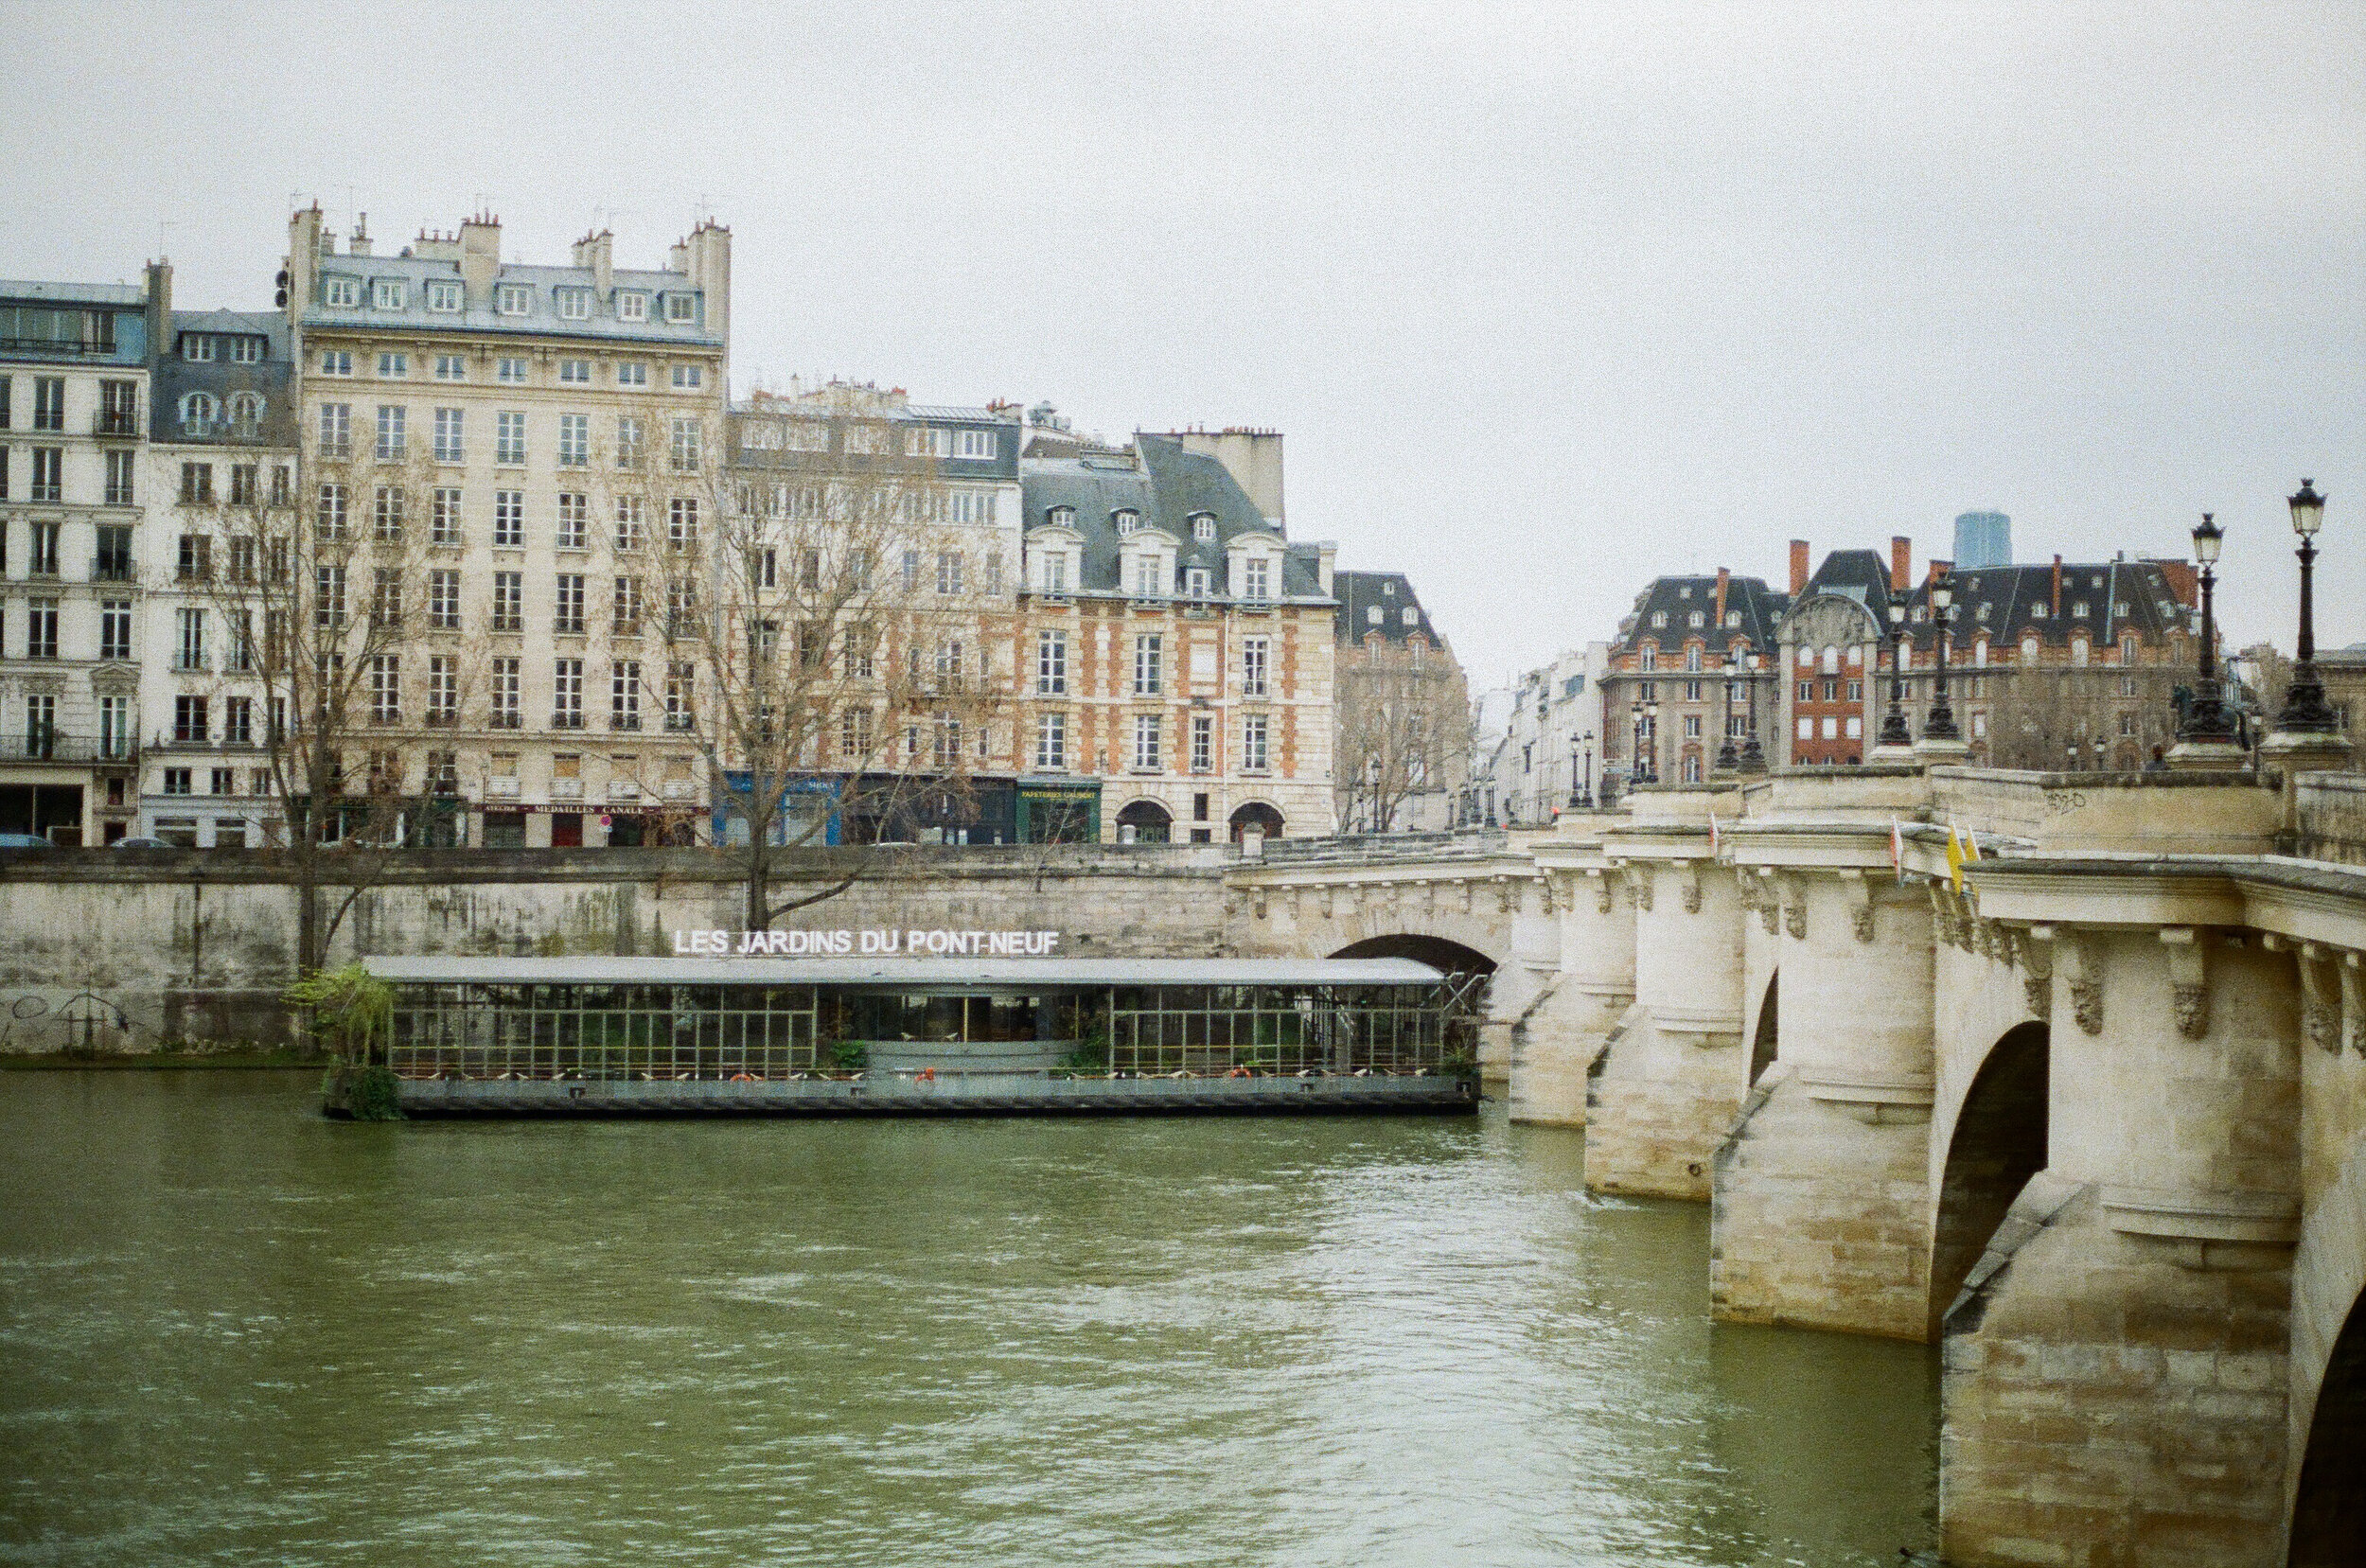   Pont Neuf. Tuesday, March 17th.  